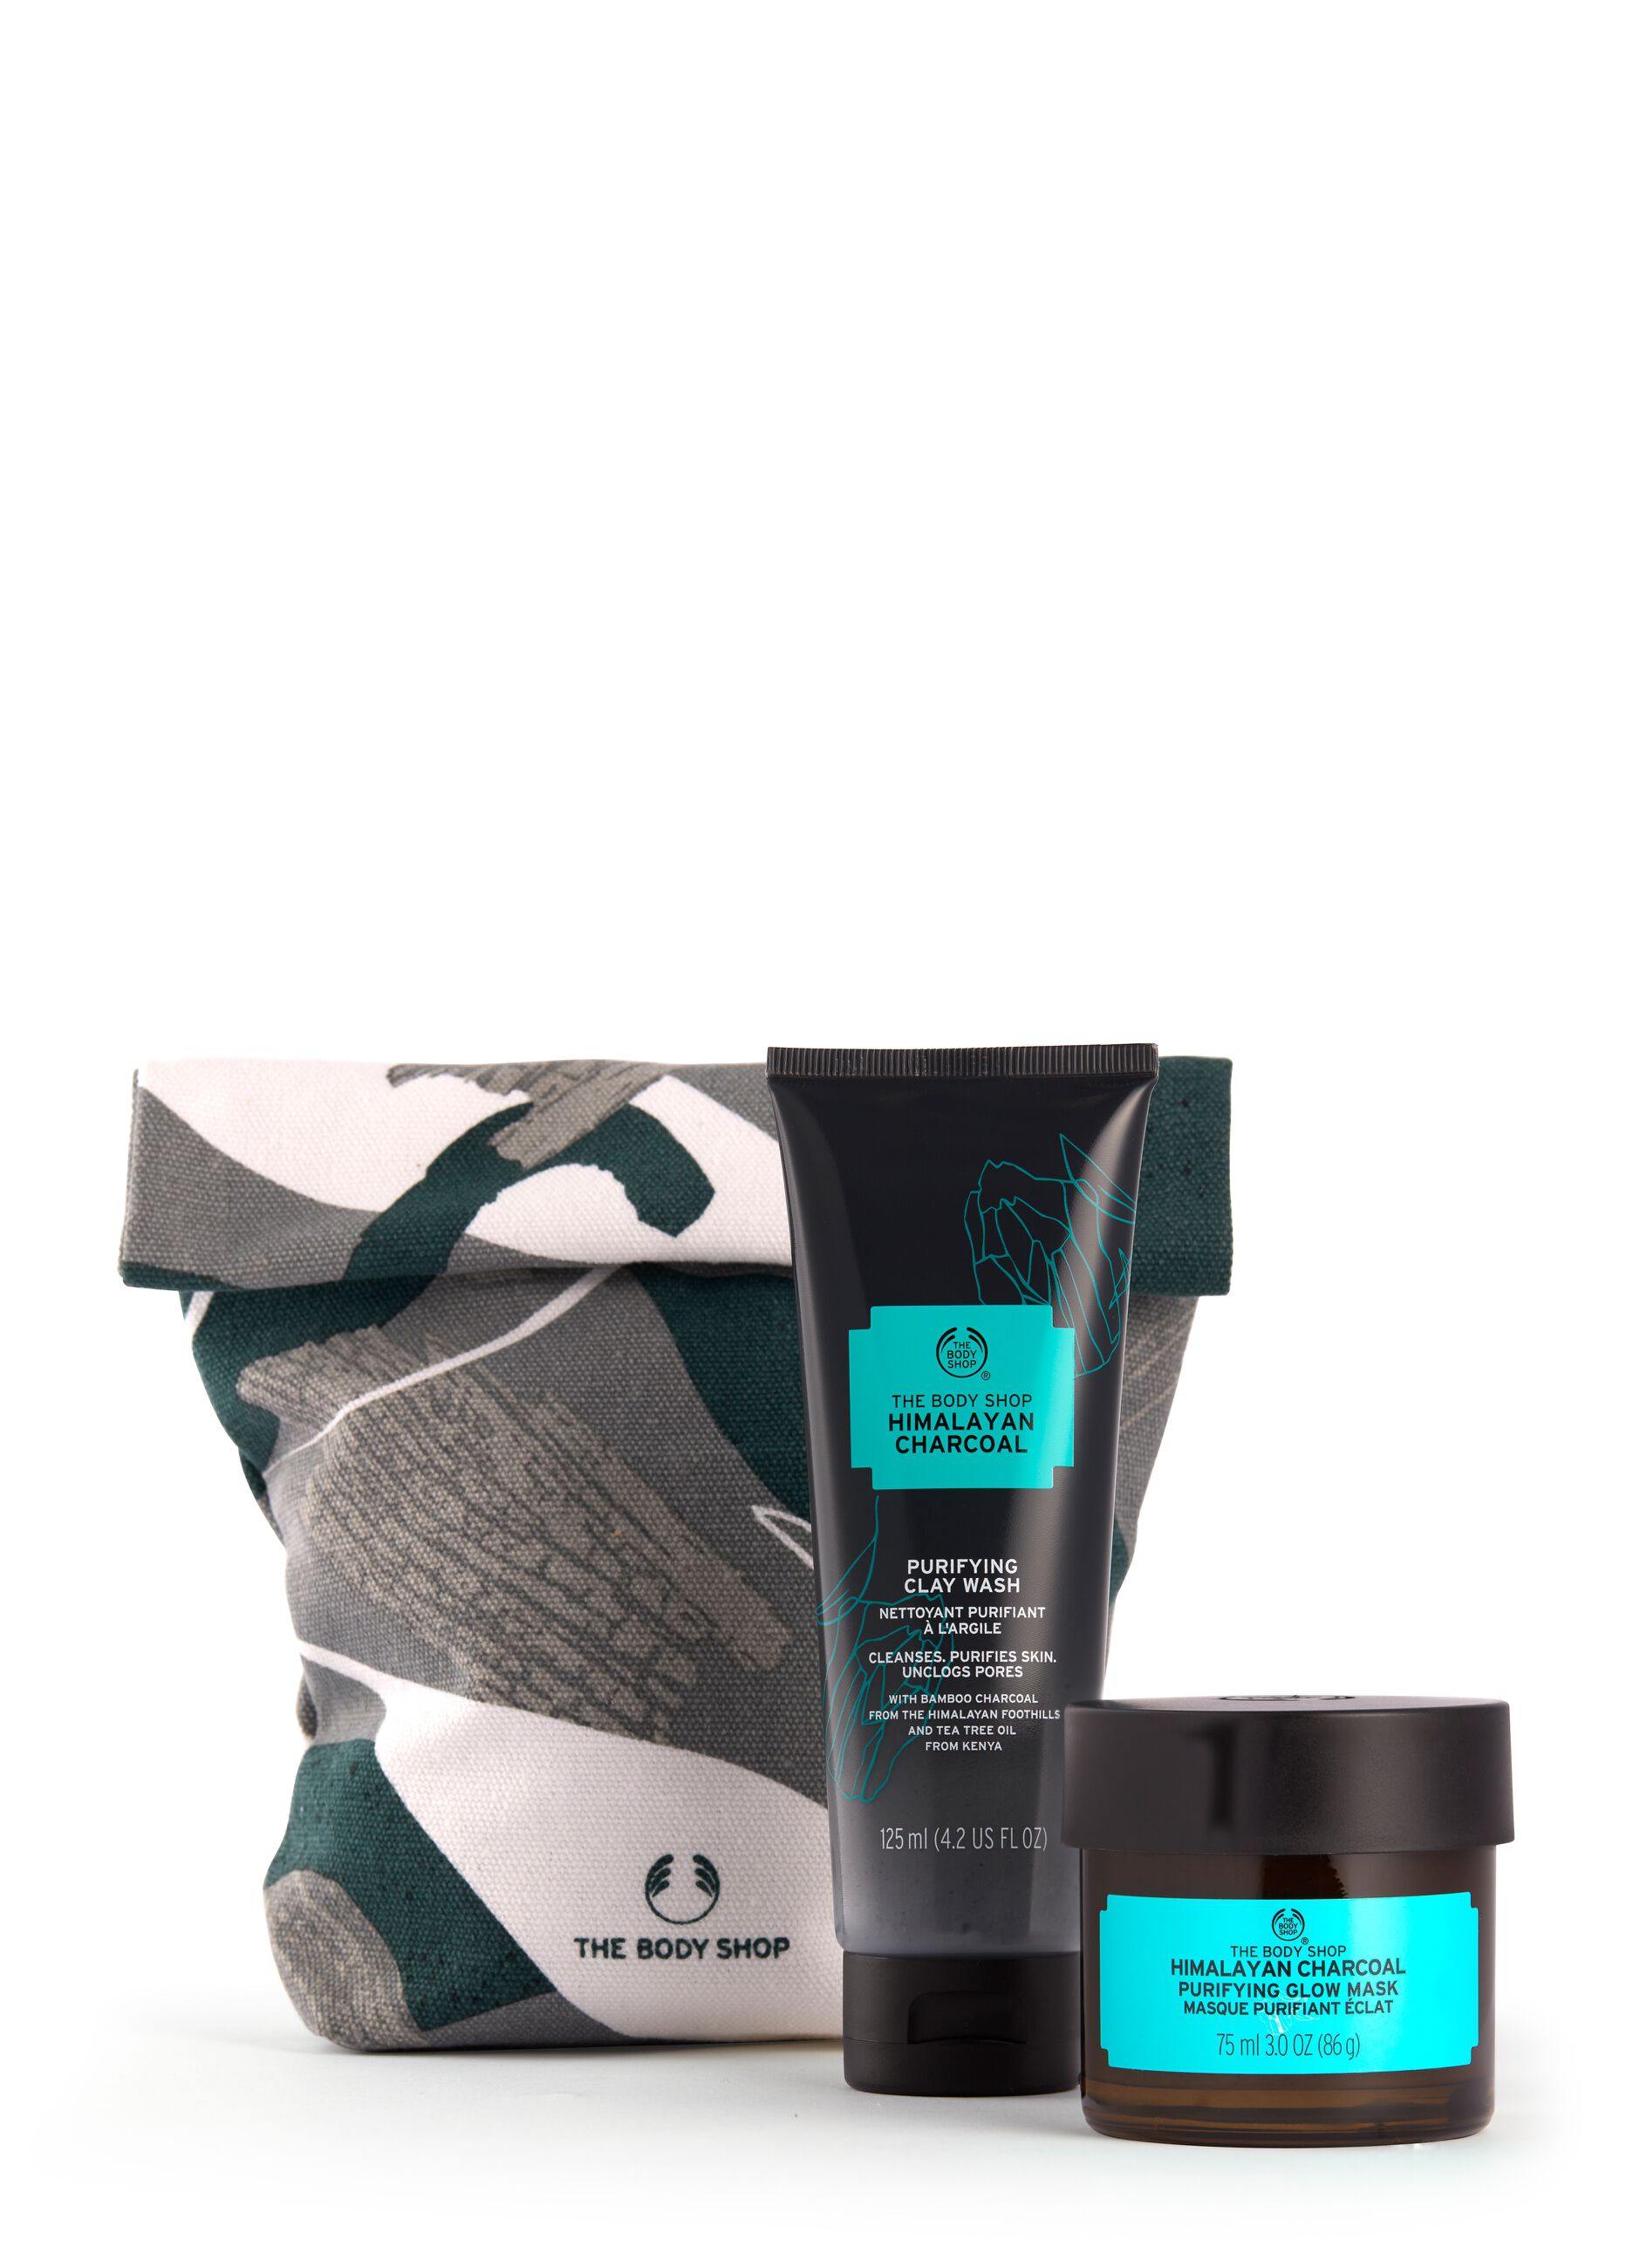 The Body Shop purifying kit with Himalayan charcoal